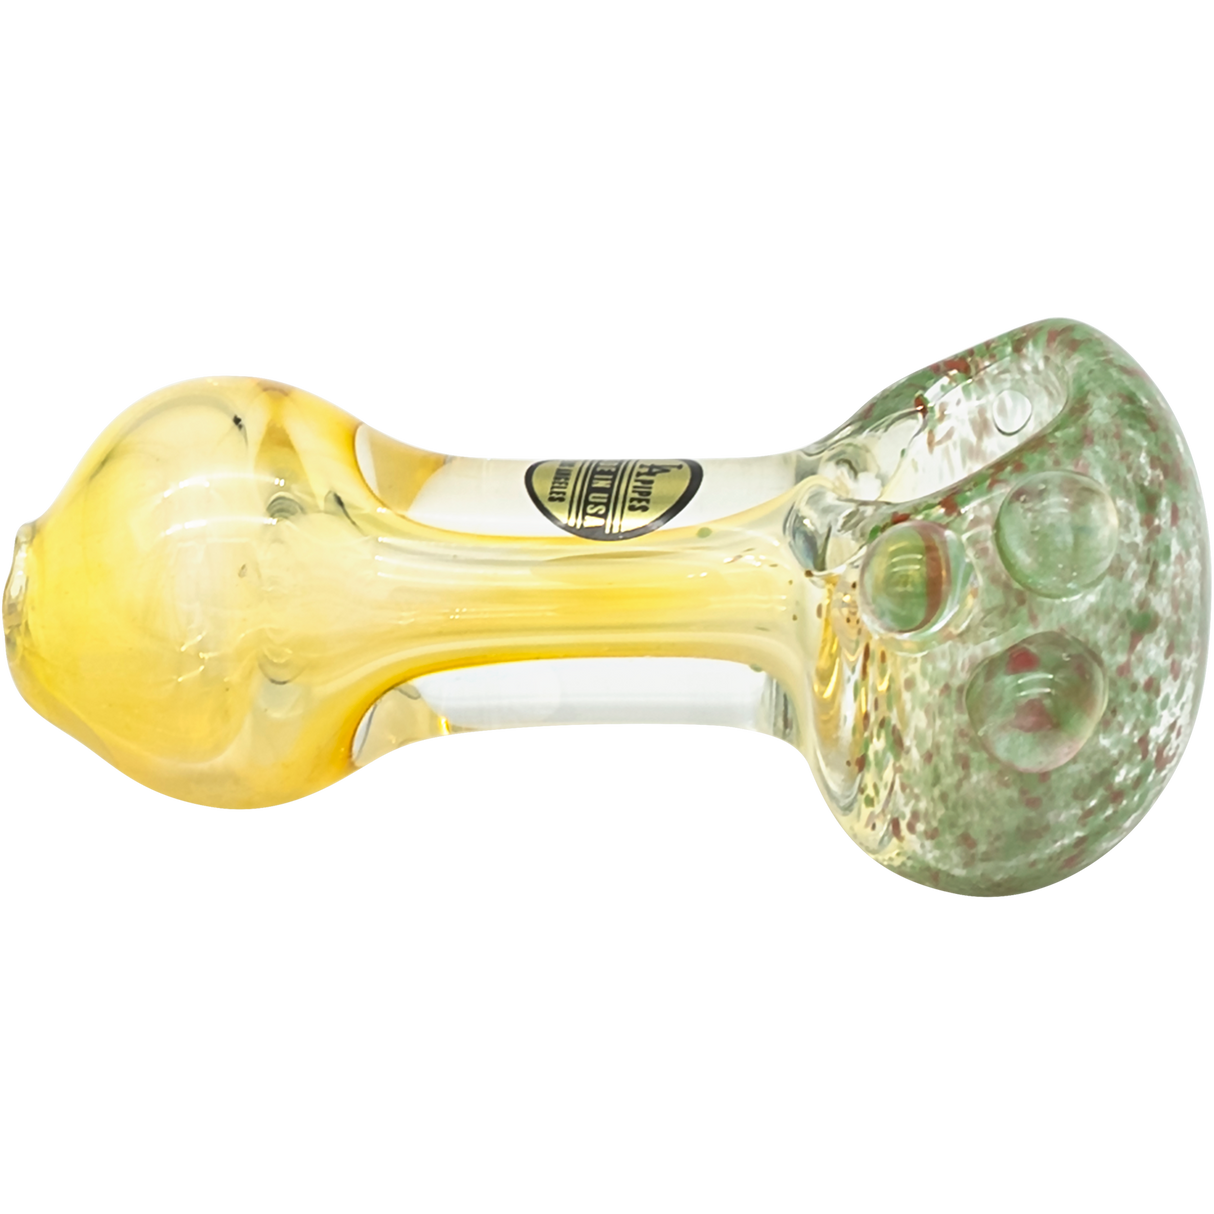 LA Pipes 'Thick Neck Freckles' Spoon Pipe, Fumed Color Changing, Heavy Wall Glass, Top View